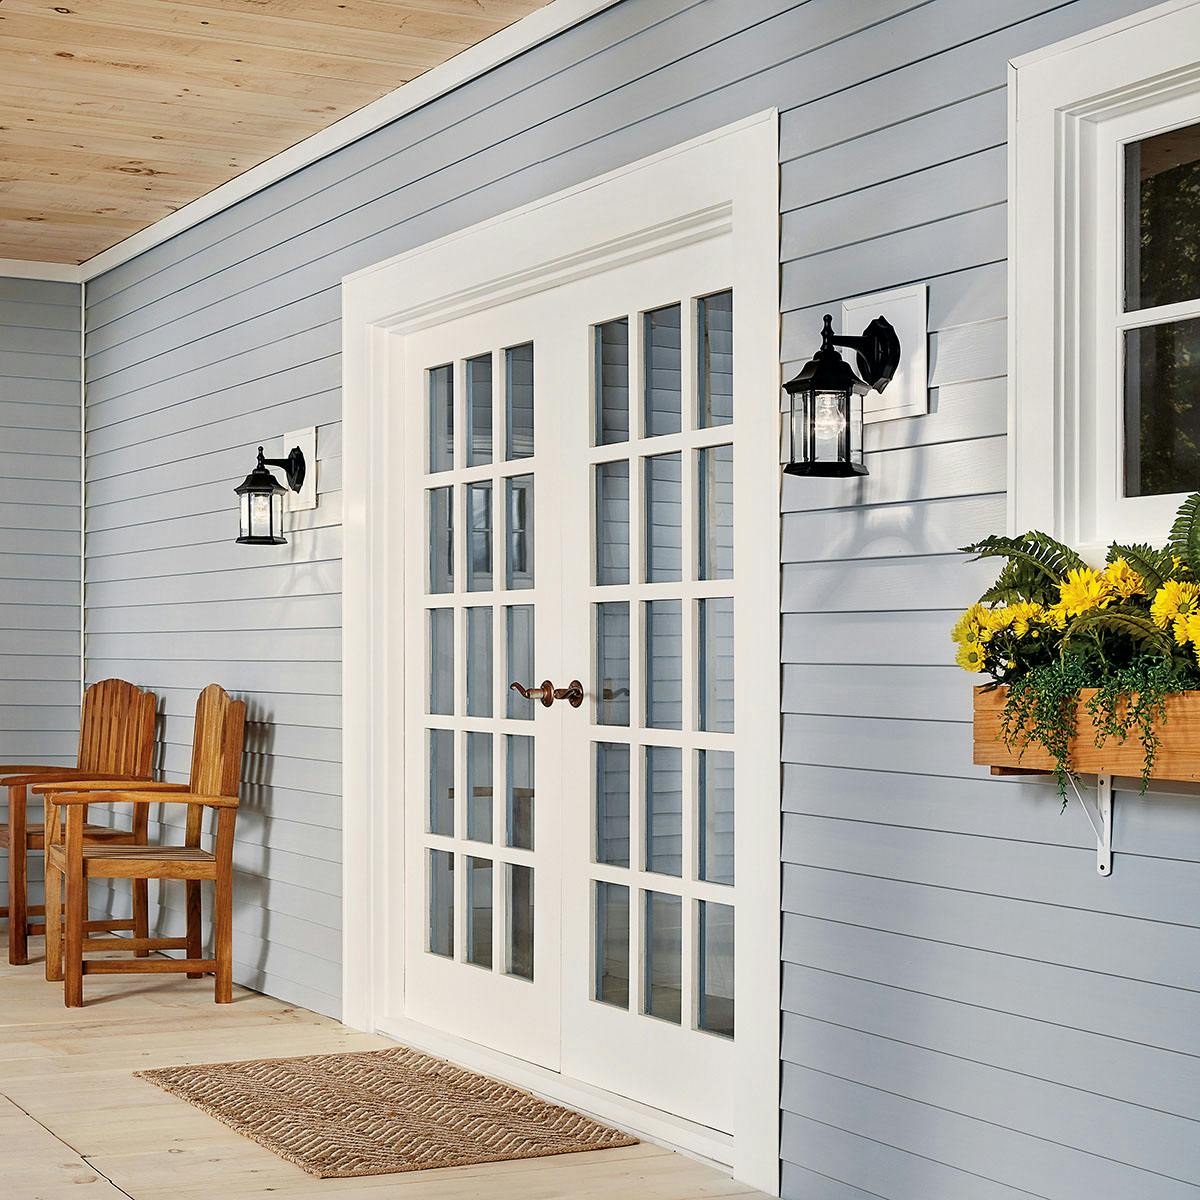 Day time Exterior image featuring Chesapeake outdoor wall light 9776BK